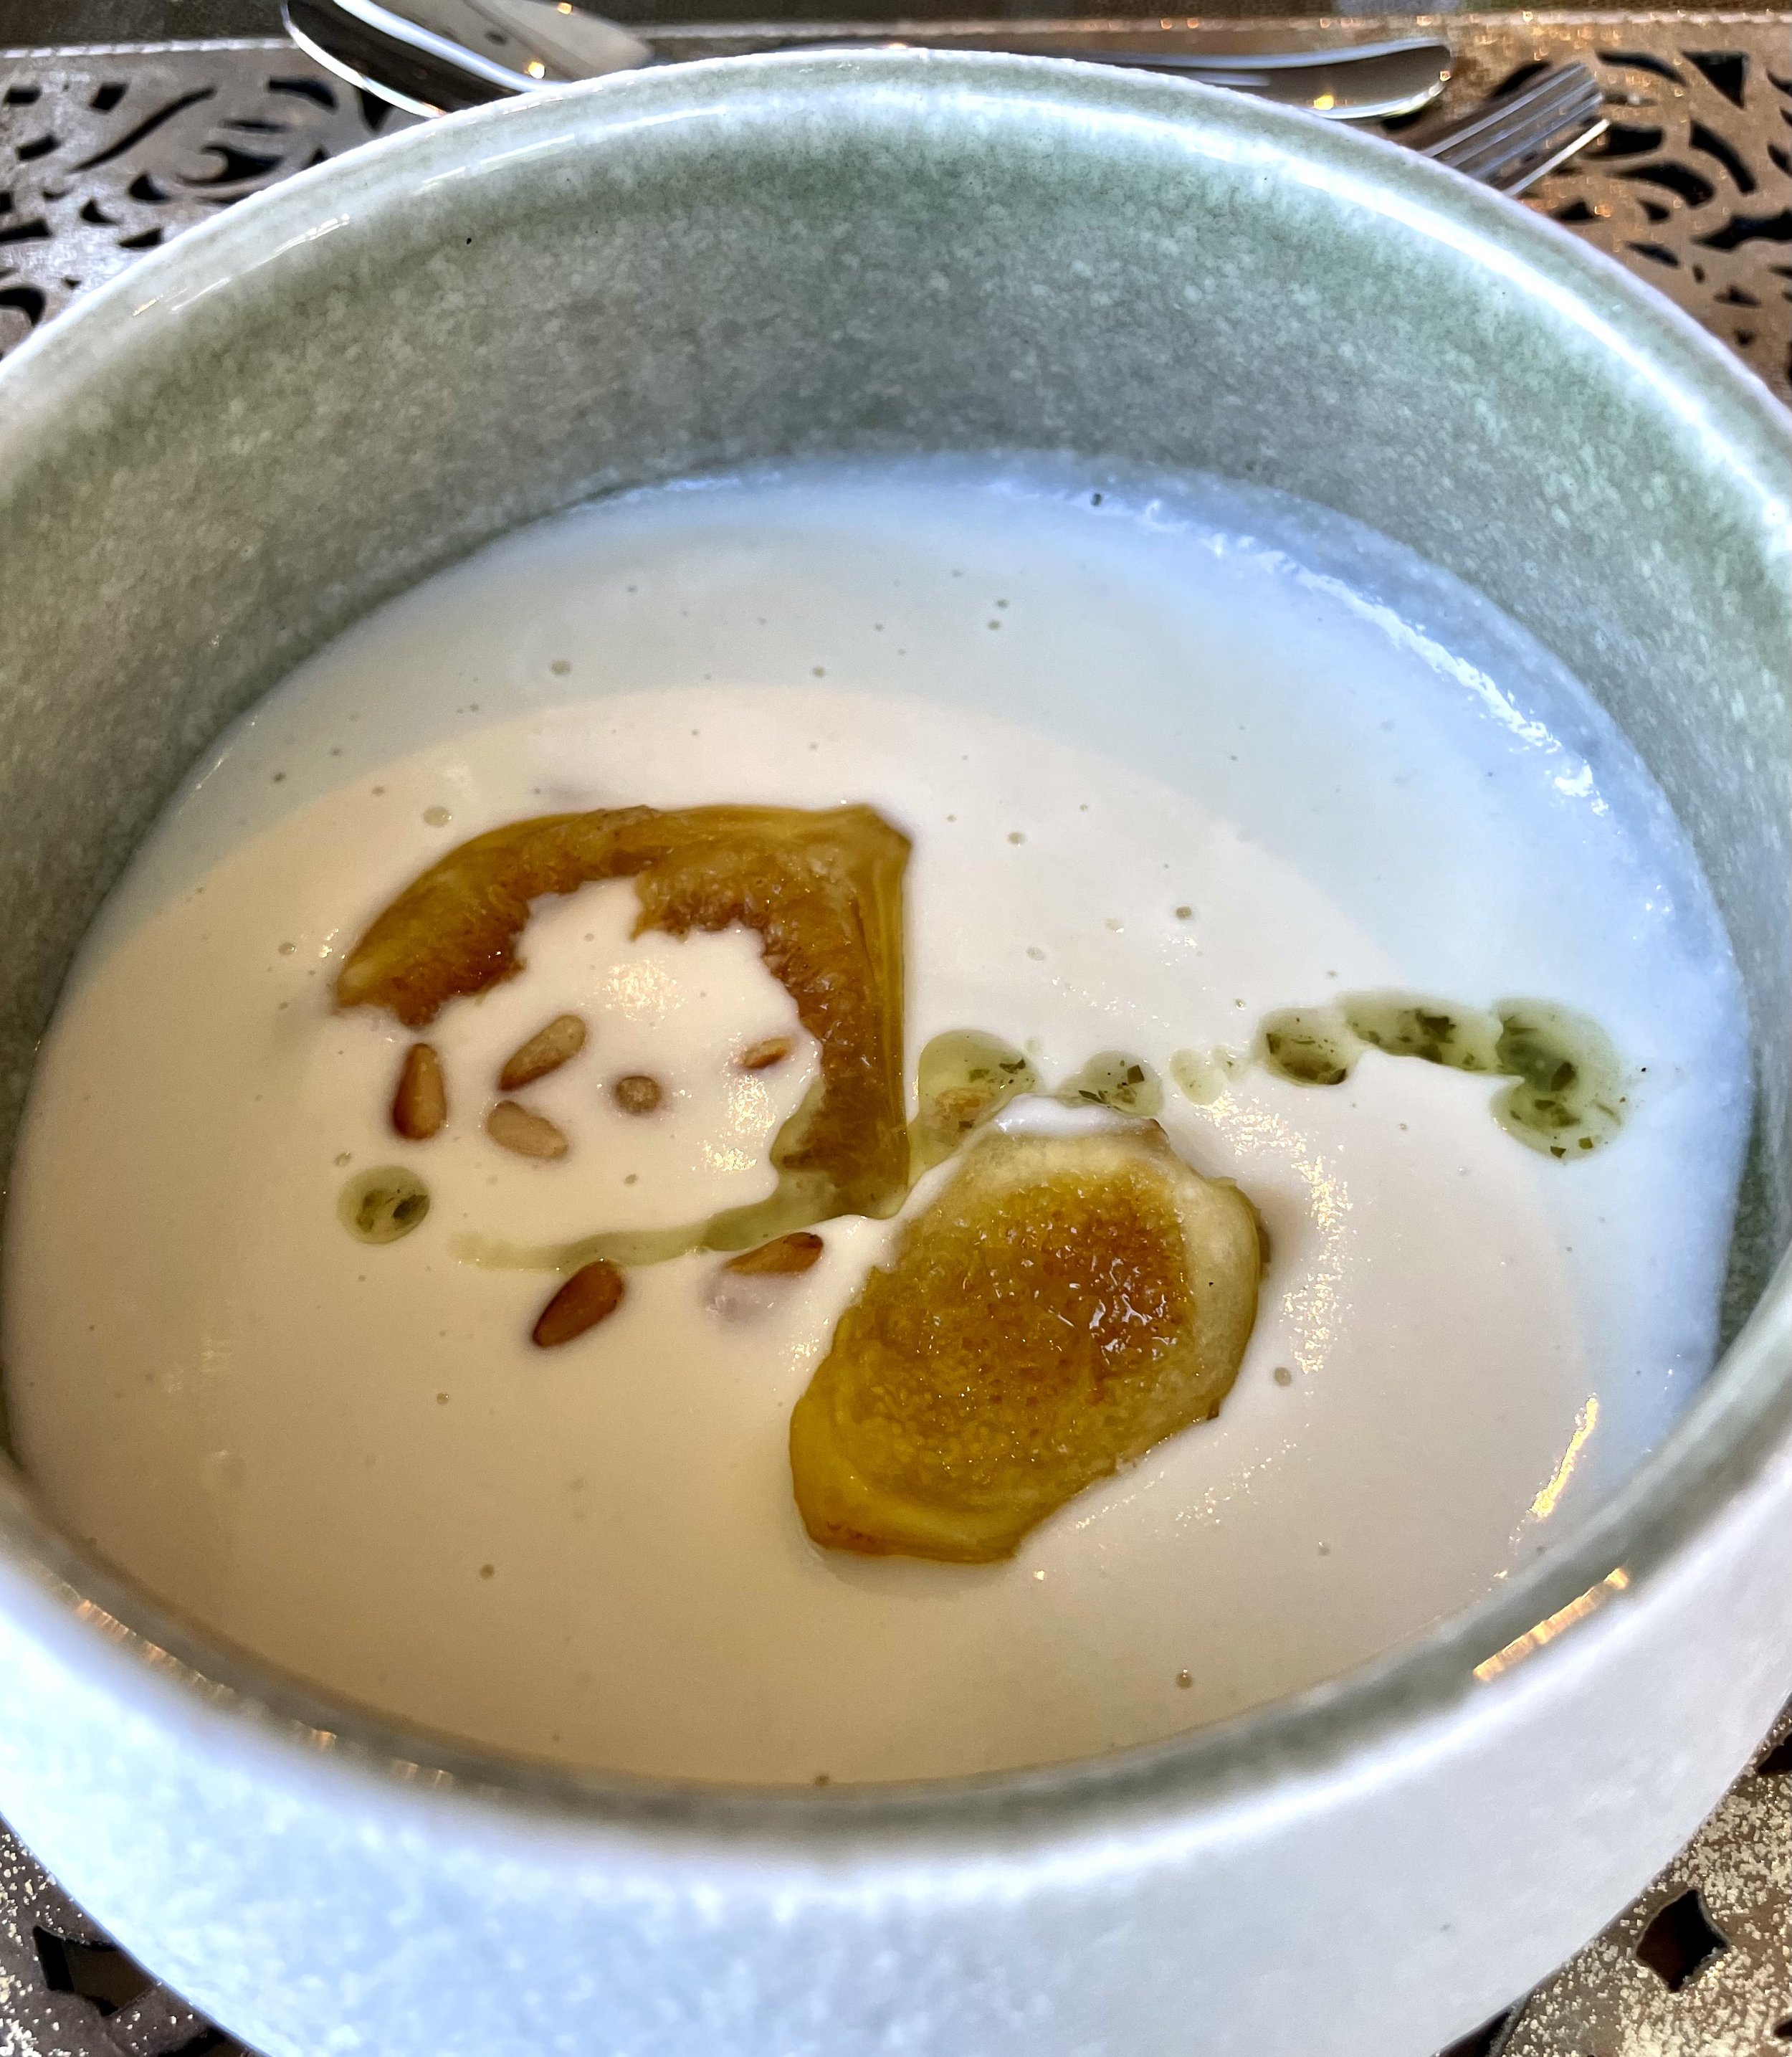  Chef's Table ‘Tease the Senses’ - cauliflower veloute with marzipan, figs, peanuts &amp; ginger oil 